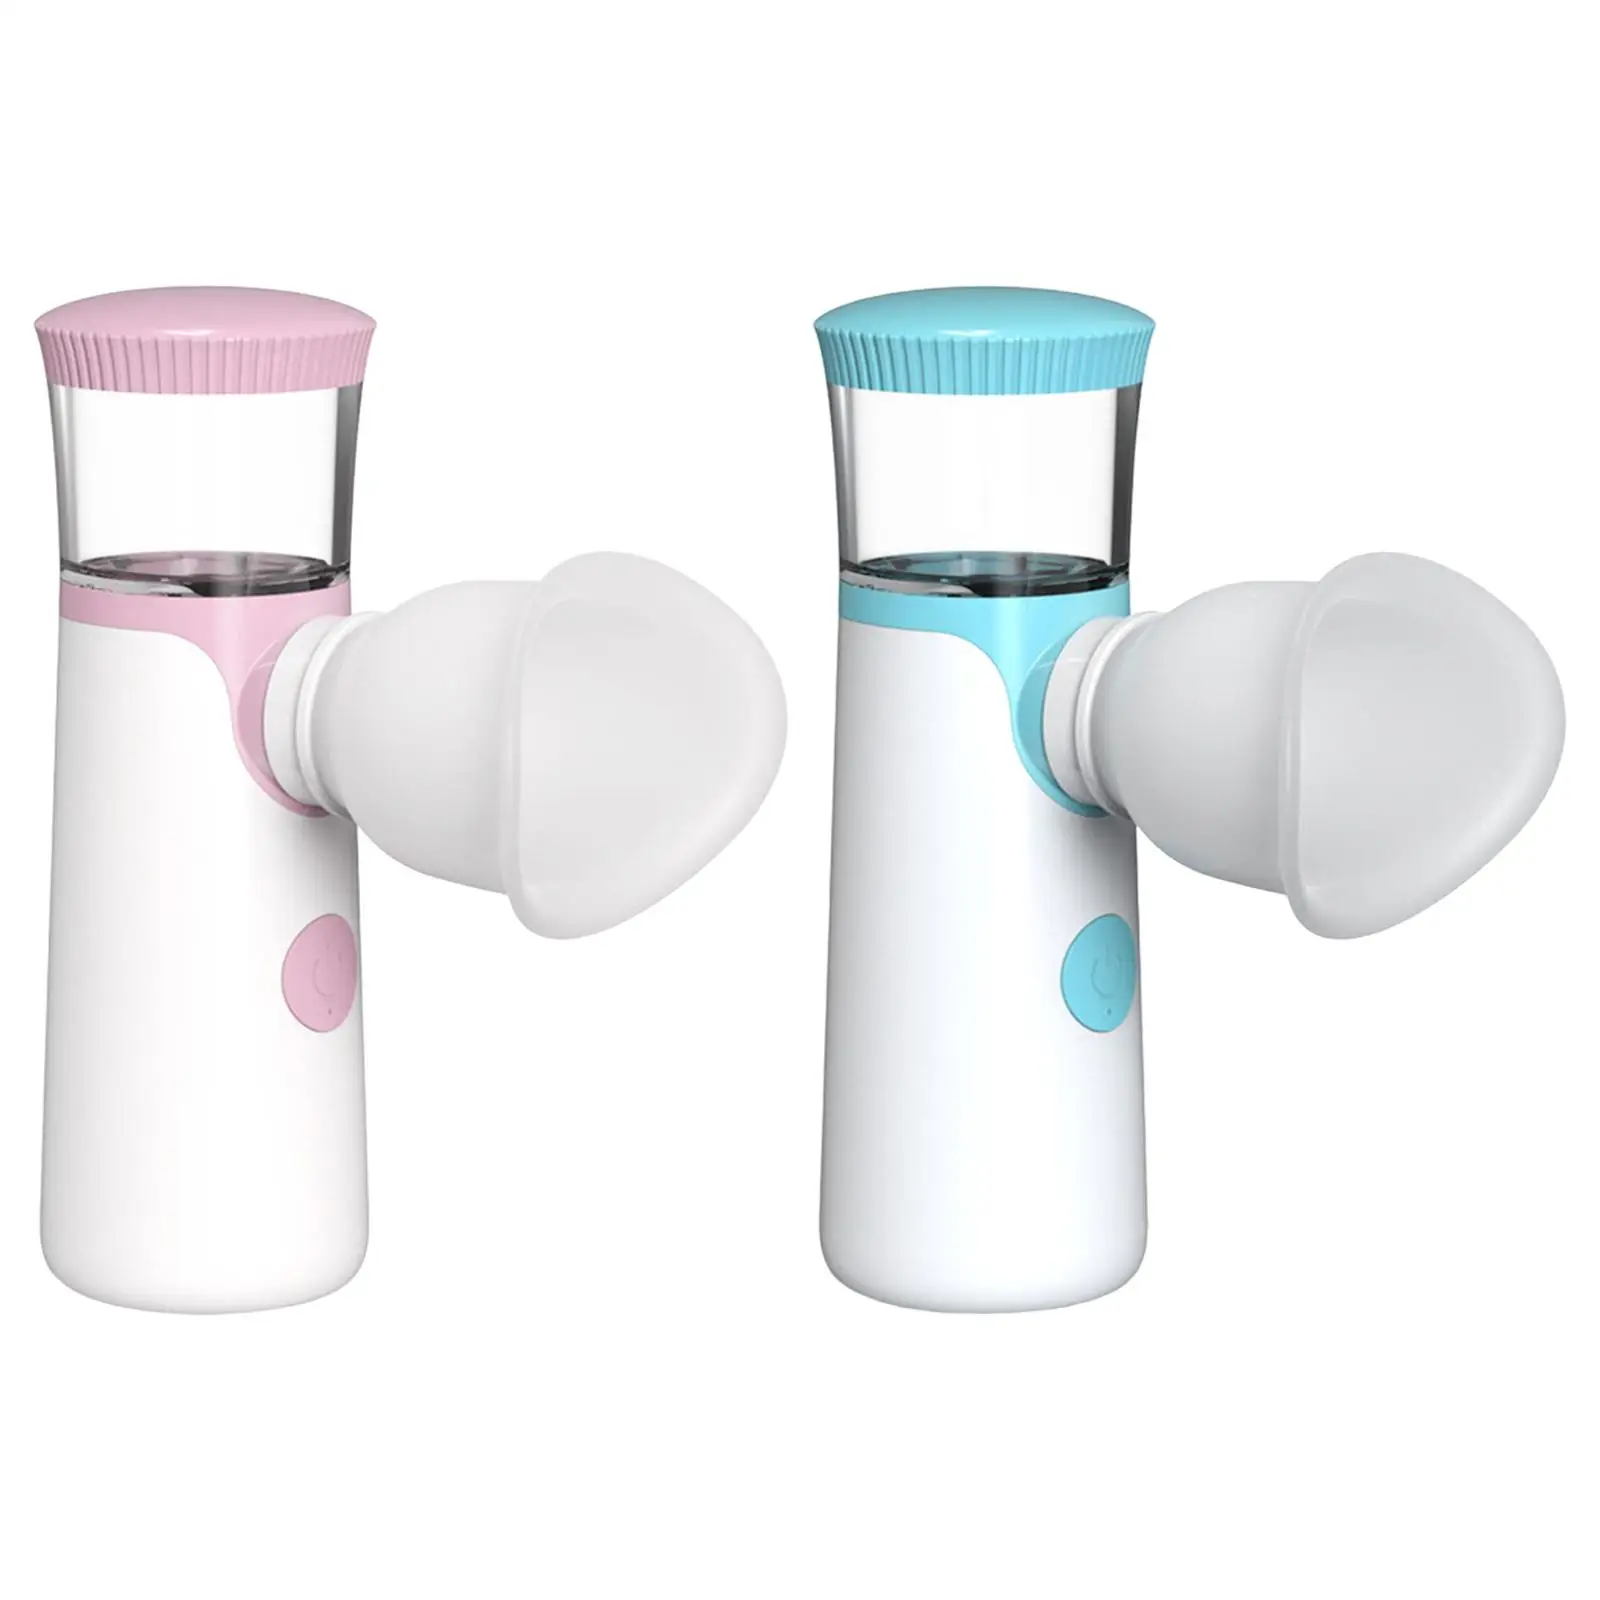 Handy Nano Facial Mister Eye Sprayer Nano Ionic USB Rechargeable Hydration Face Mist Steamer for Face and Eye Eyelash Extensions